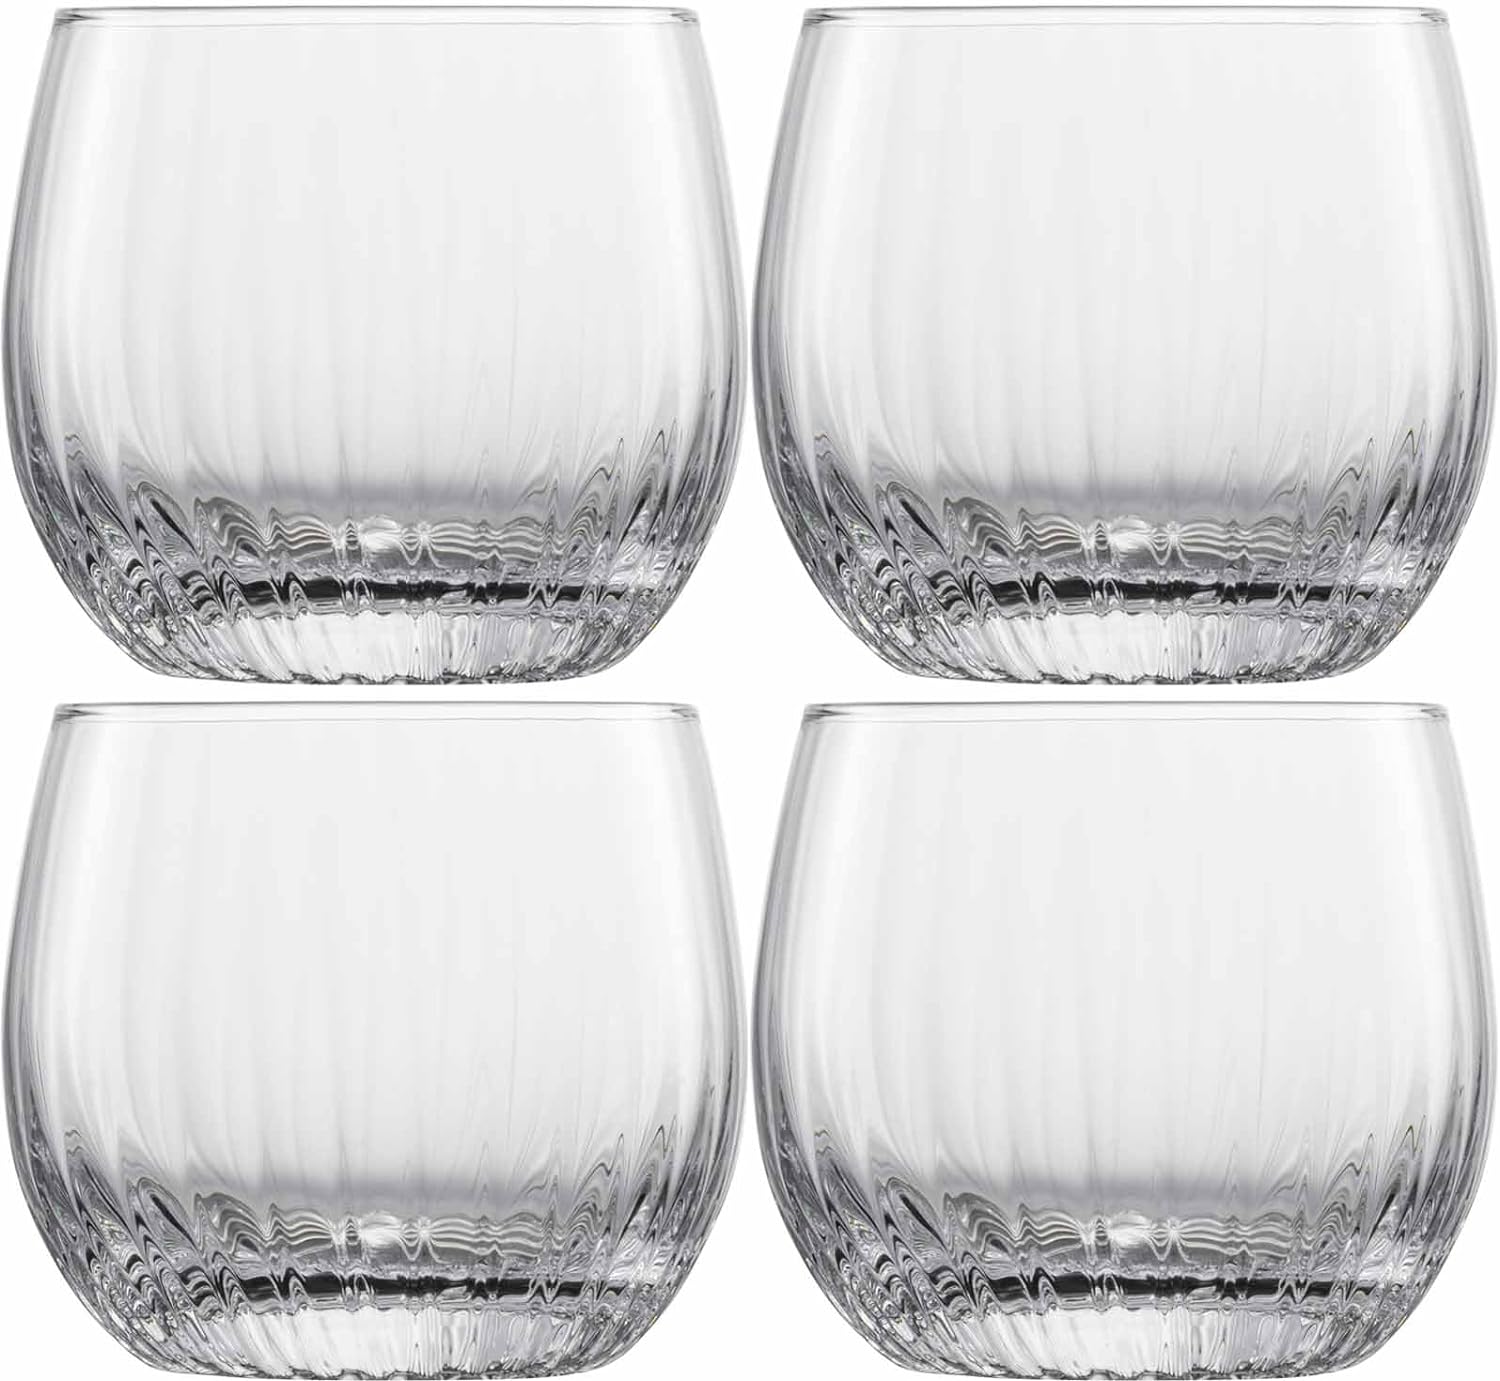 Schott Glas Fortune 122325 Whisky Glass Made of High-Quality Glass, Set of 4, Height: 8.5 cm, Diameter: 9.5 cm, Volume: 400 ml